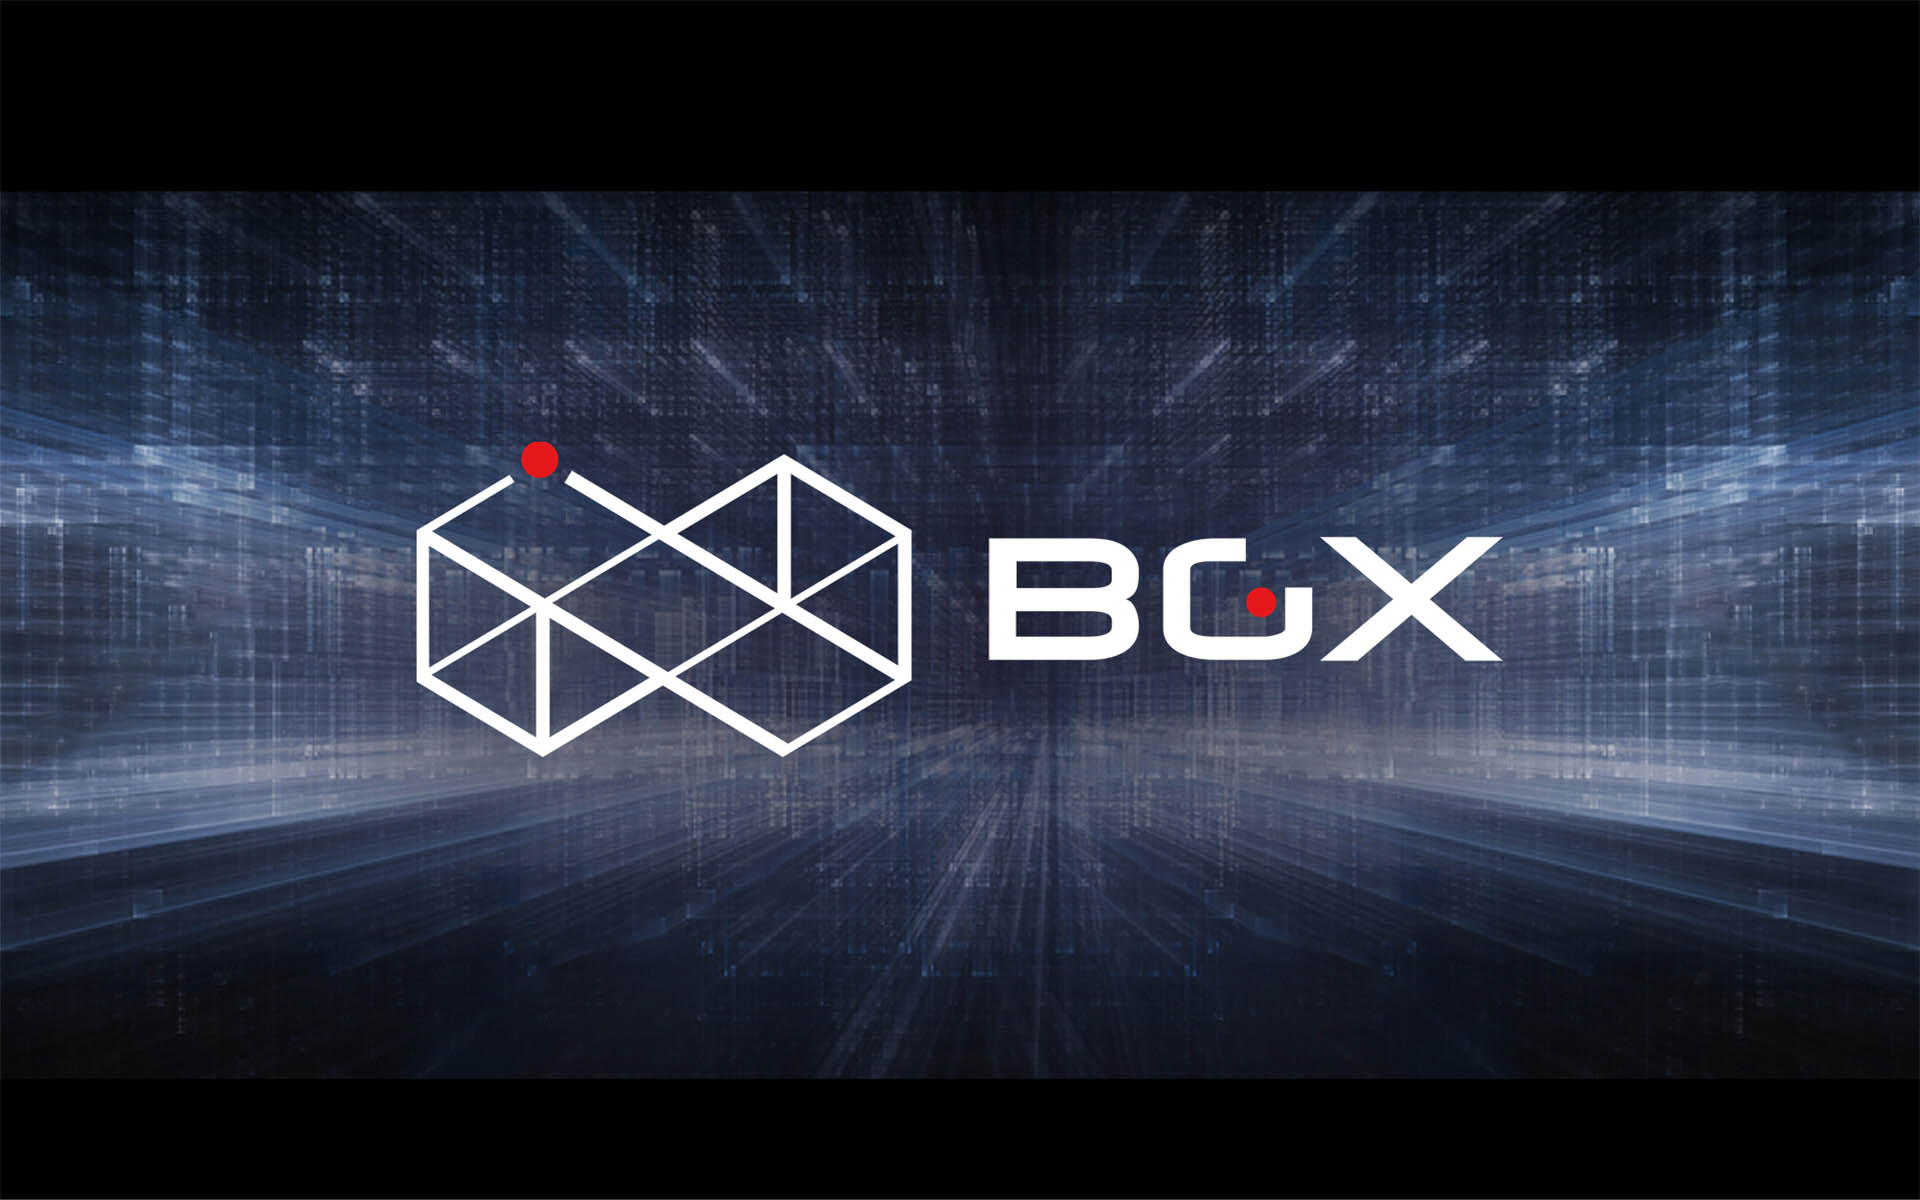 BGX: The New Face of a Multi‐Billion Industry